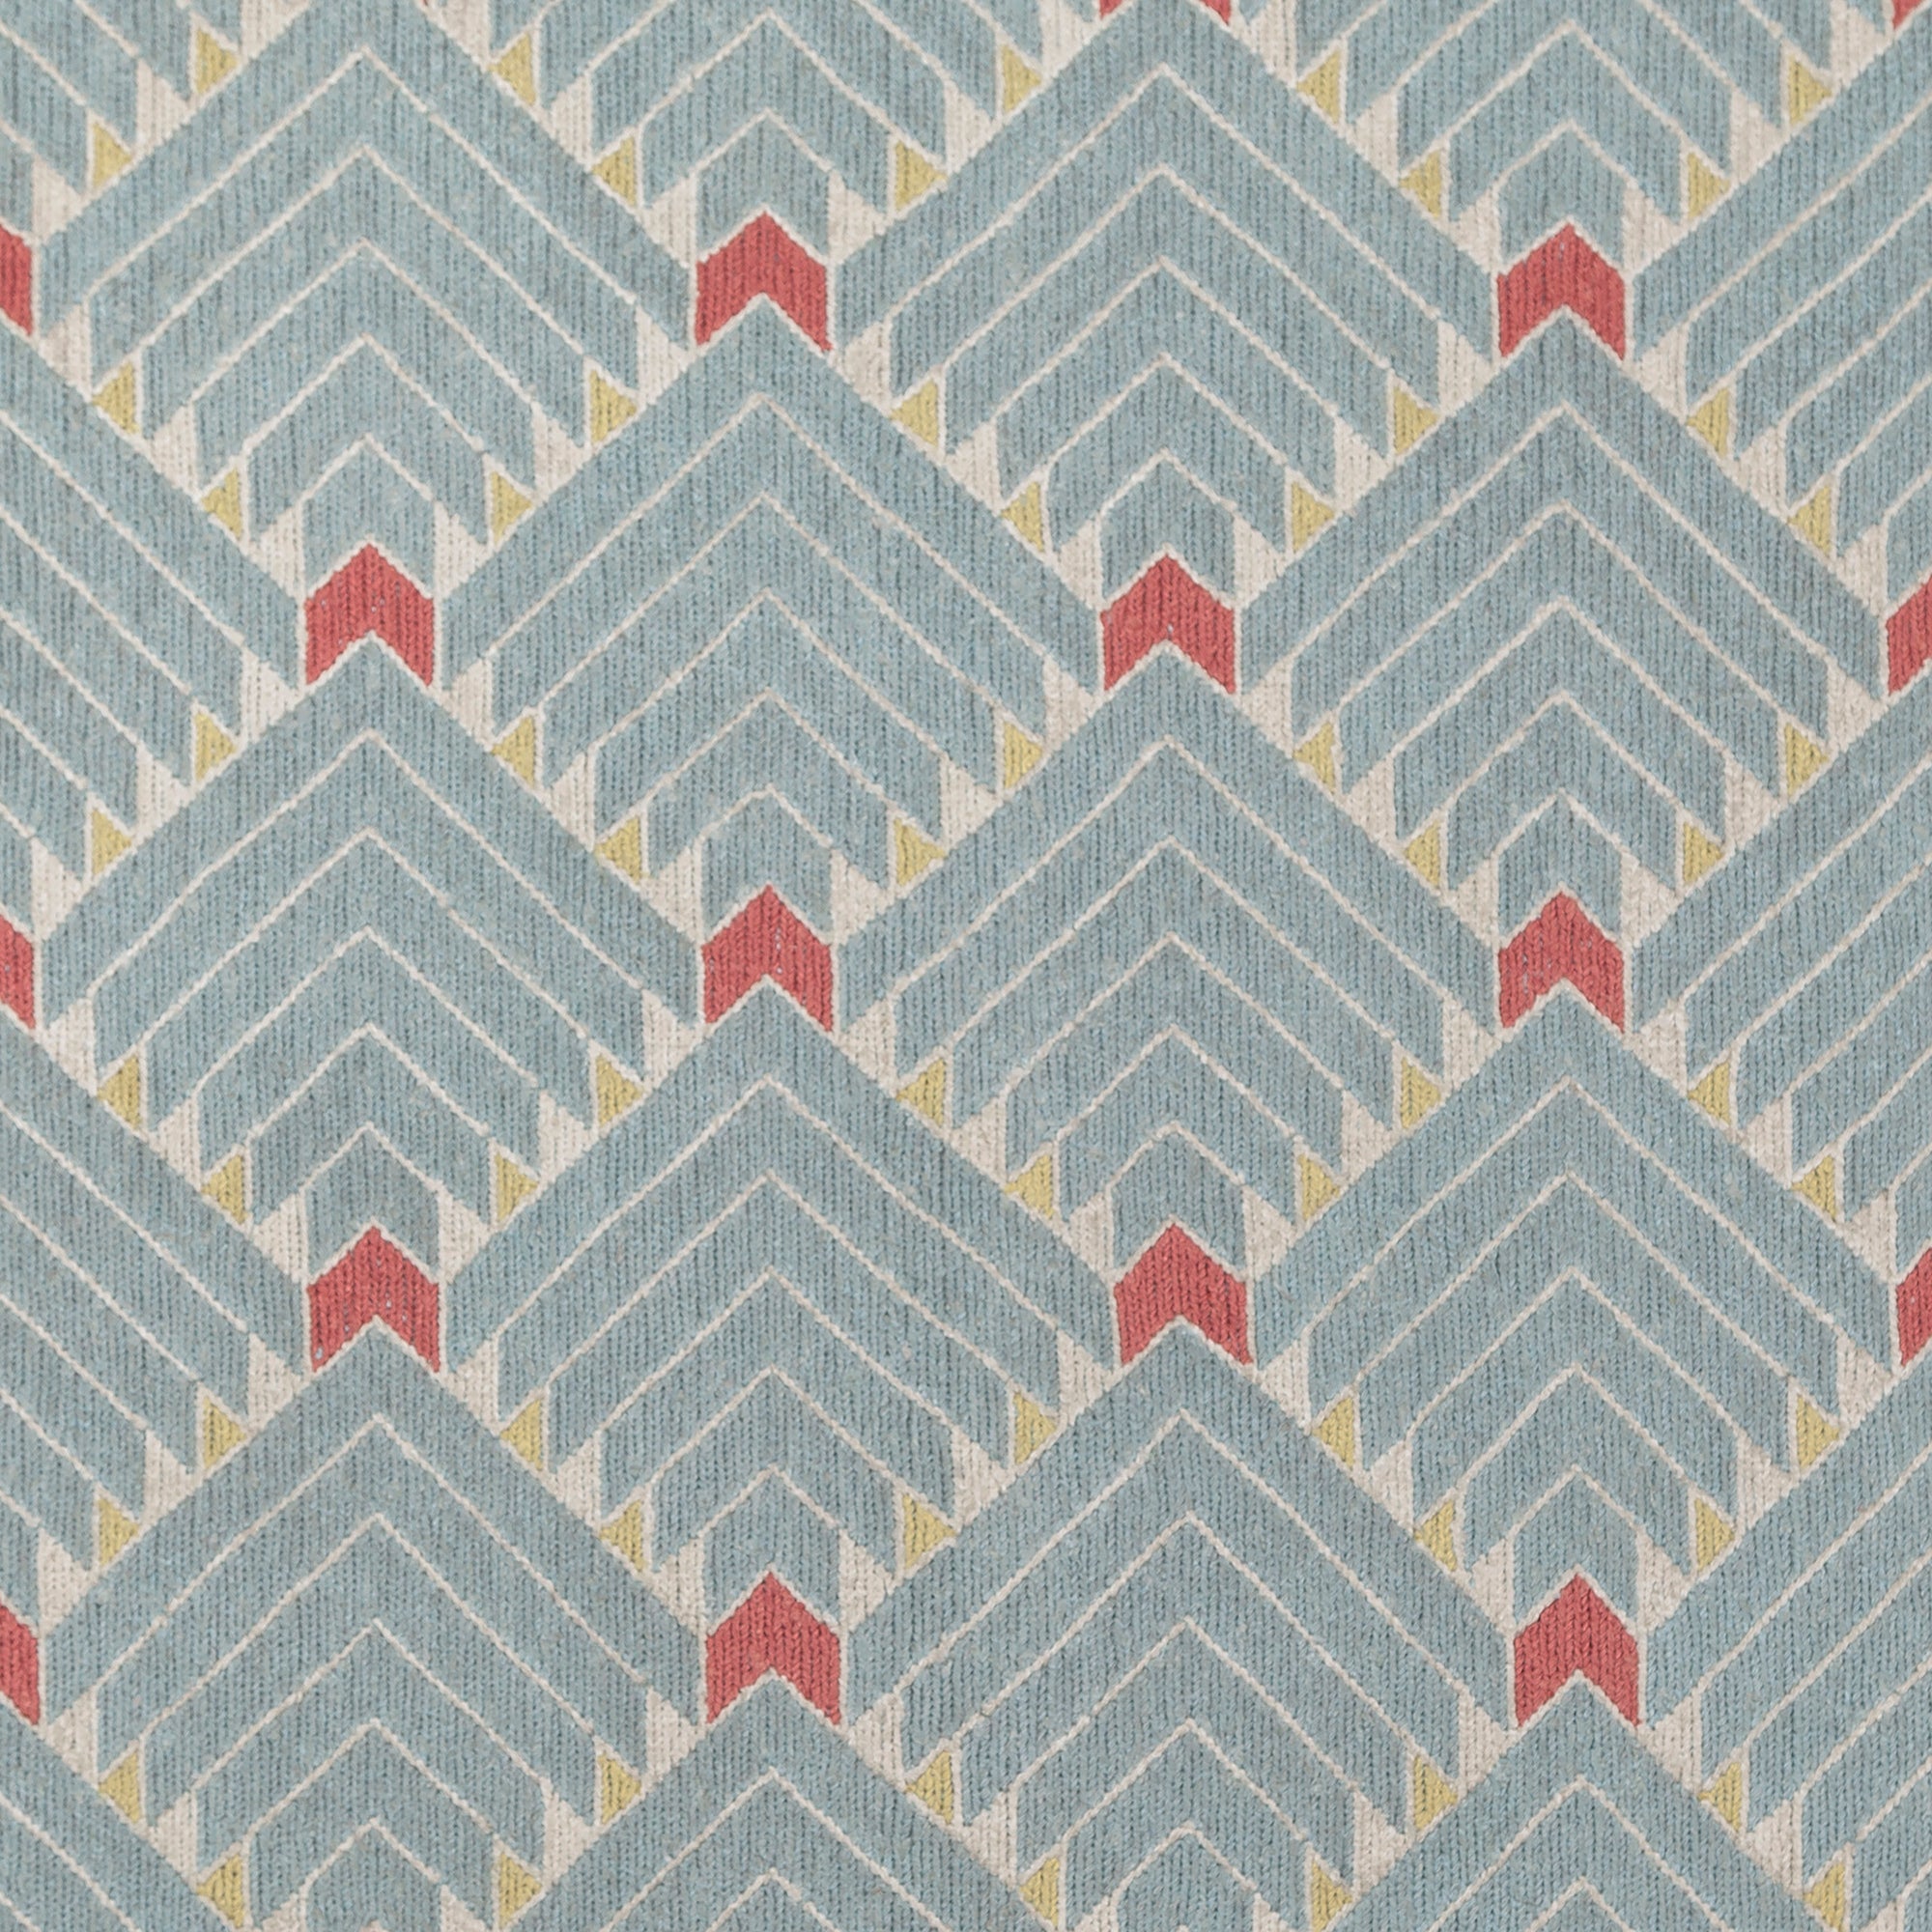 The Arrow Rug in Powder Blue-Coral features a dense pattern of nesting arrow shapes in soft blue with accents of coral and yellow on an ivory field. 